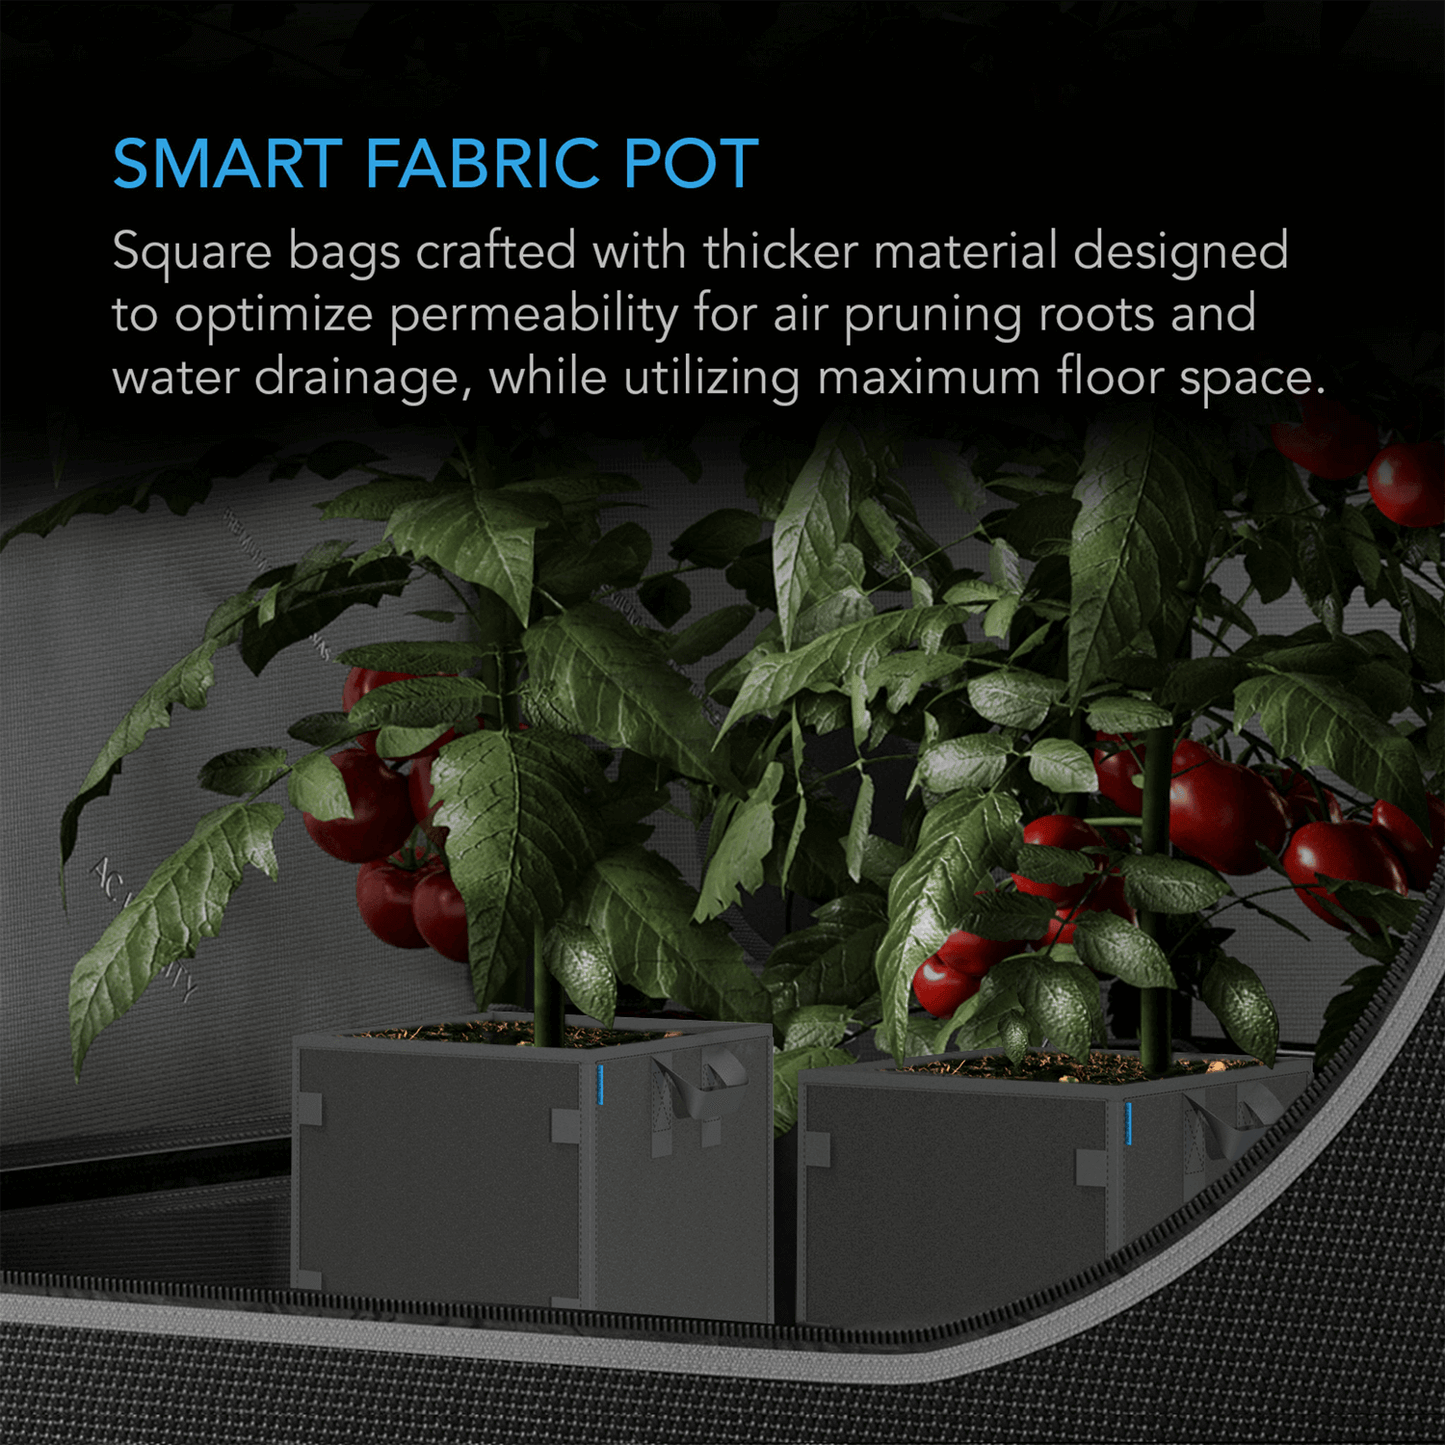 AC Infinity Heavy Duty Square Fabric Pots, 5 Gallon, 5-Pack | AC-SFP5 | Grow Tents Depot | Planting & Watering | 819137022638